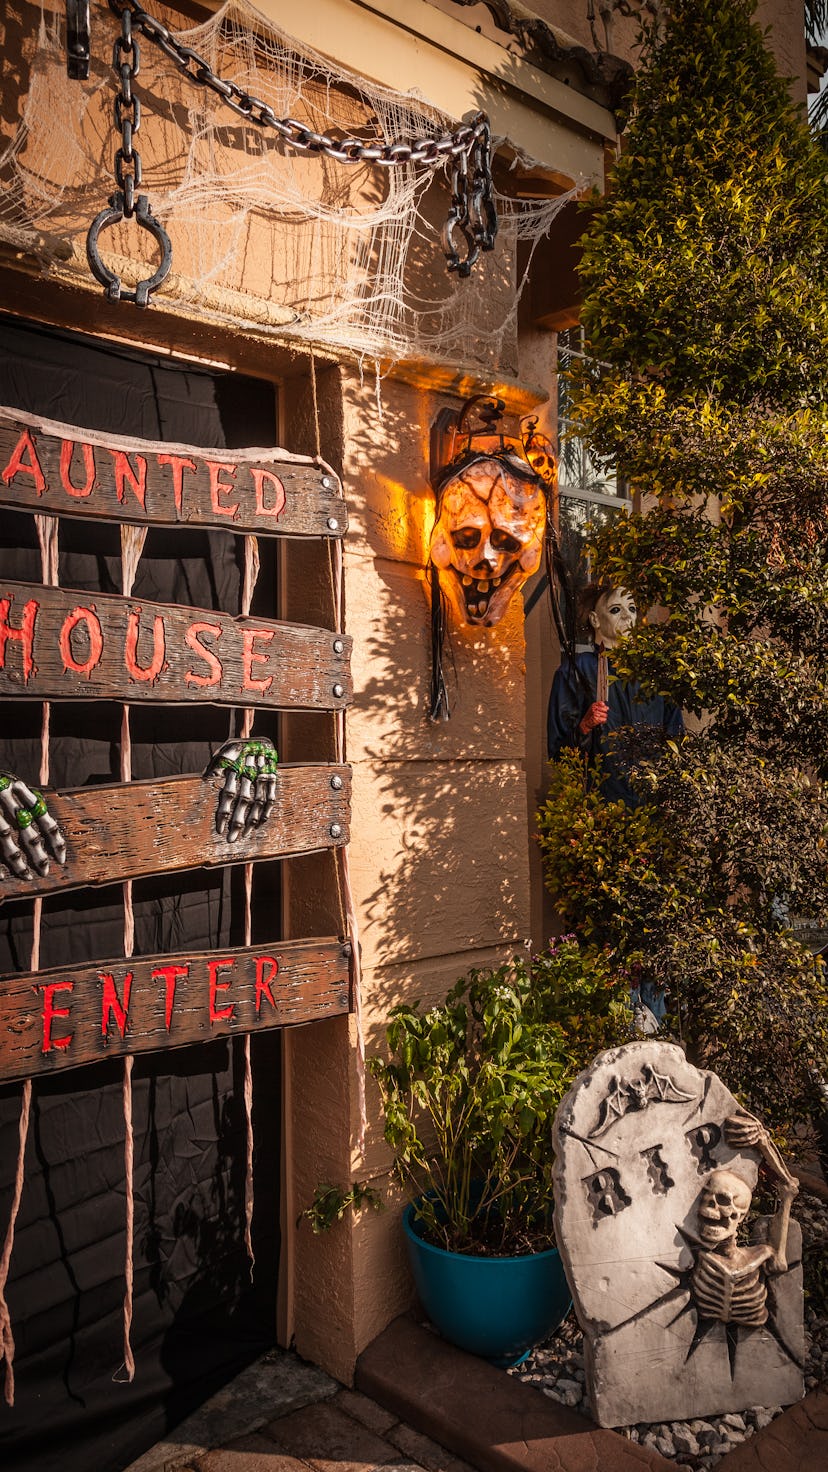 A house with a variety of haunted house decorations, including boarded up door, chains, a skull and ...